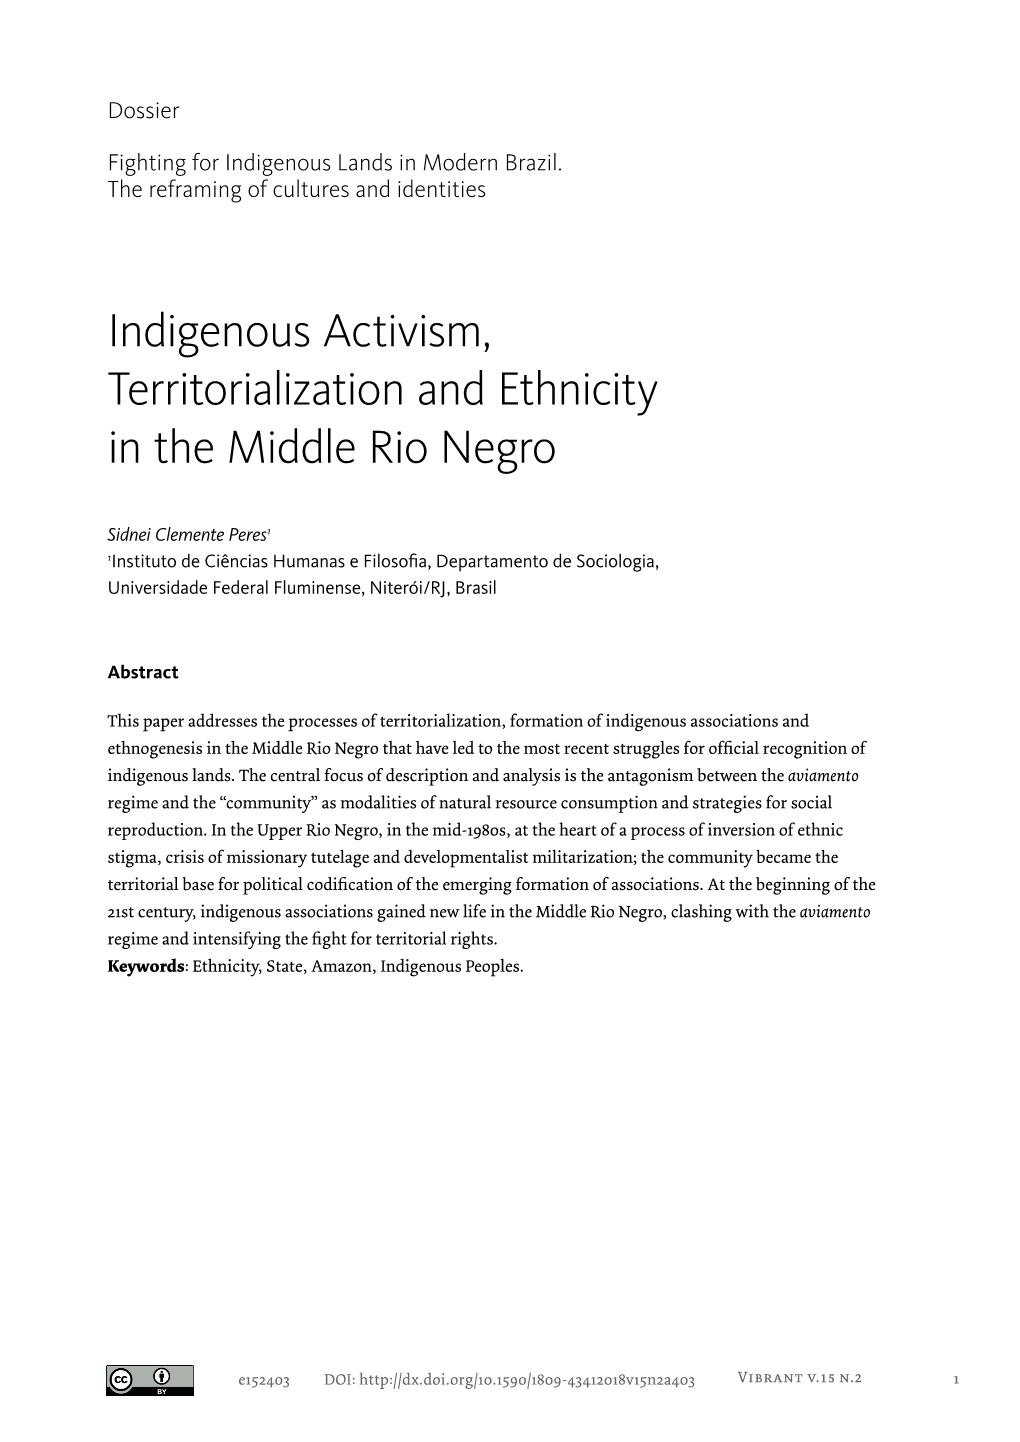 Indigenous Activism, Territorialization and Ethnicity in the Middle Rio Negro